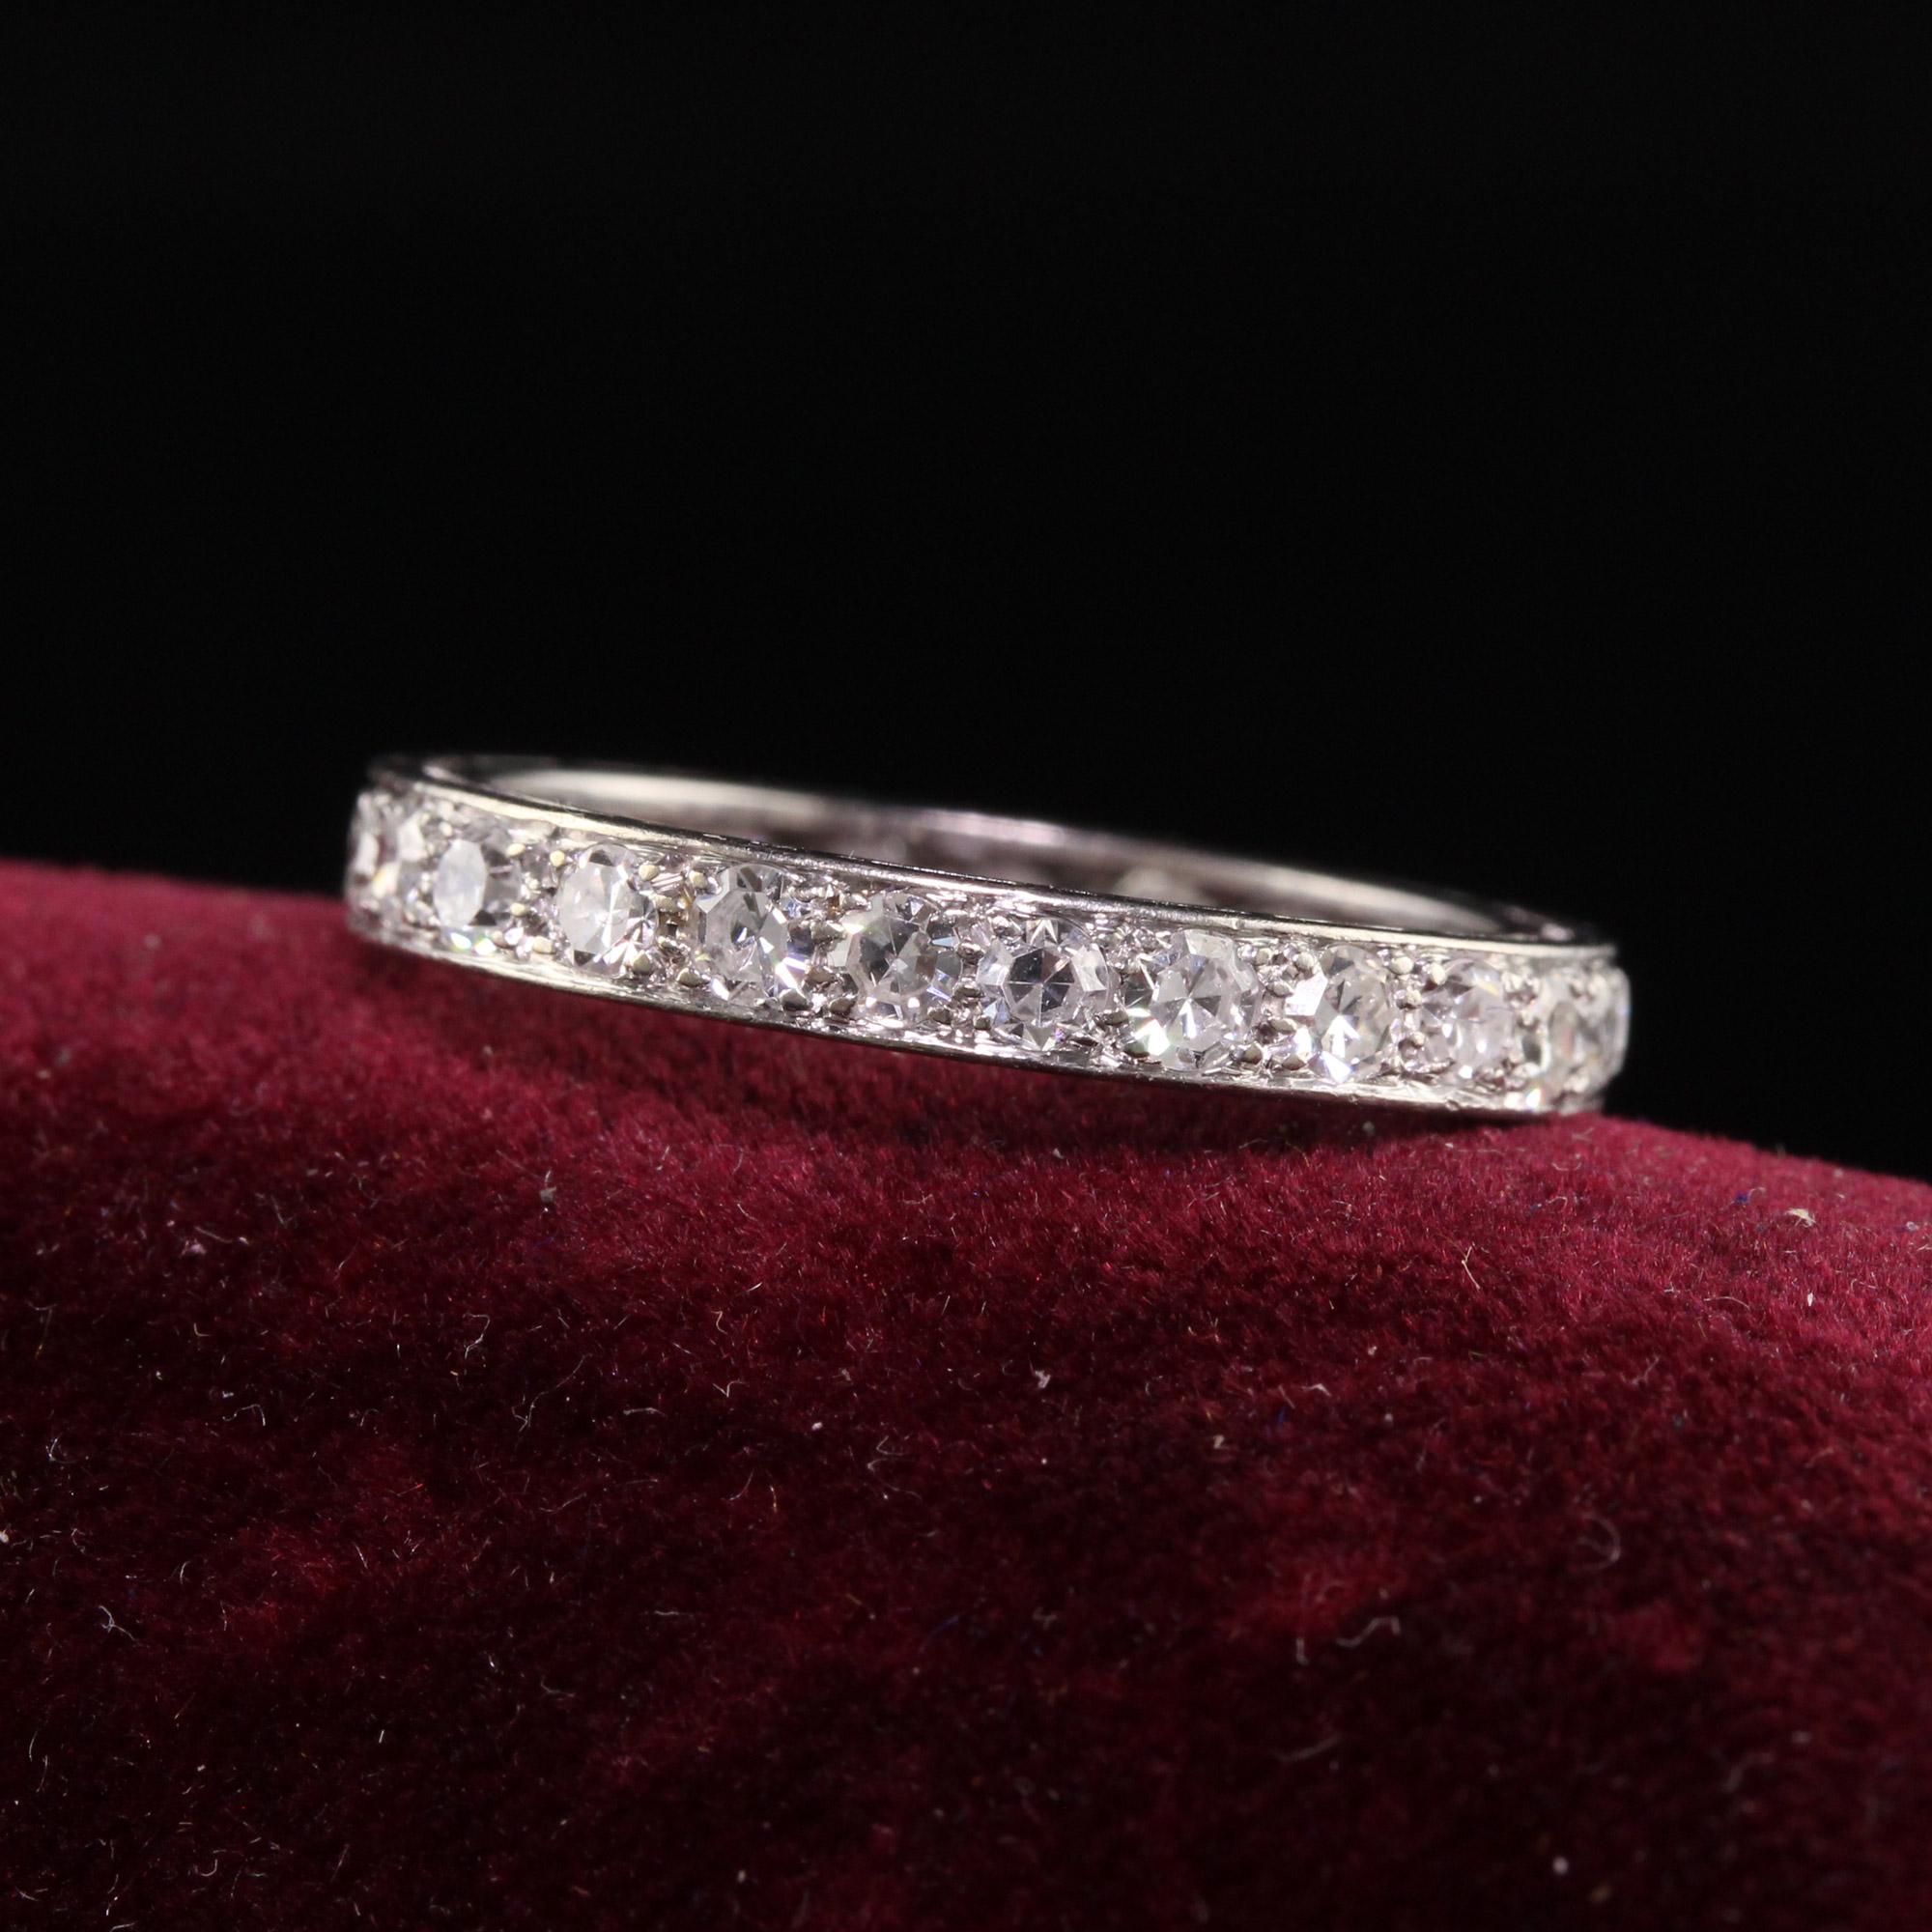 Beautiful Antique Art Deco Platinum Single Cut Diamond Eternity Band - Size 7. This incredible ring is crafted in platinum. There are single cut diamonds going around the entire ring and it is in great condition.

Item #R1413

Metal: